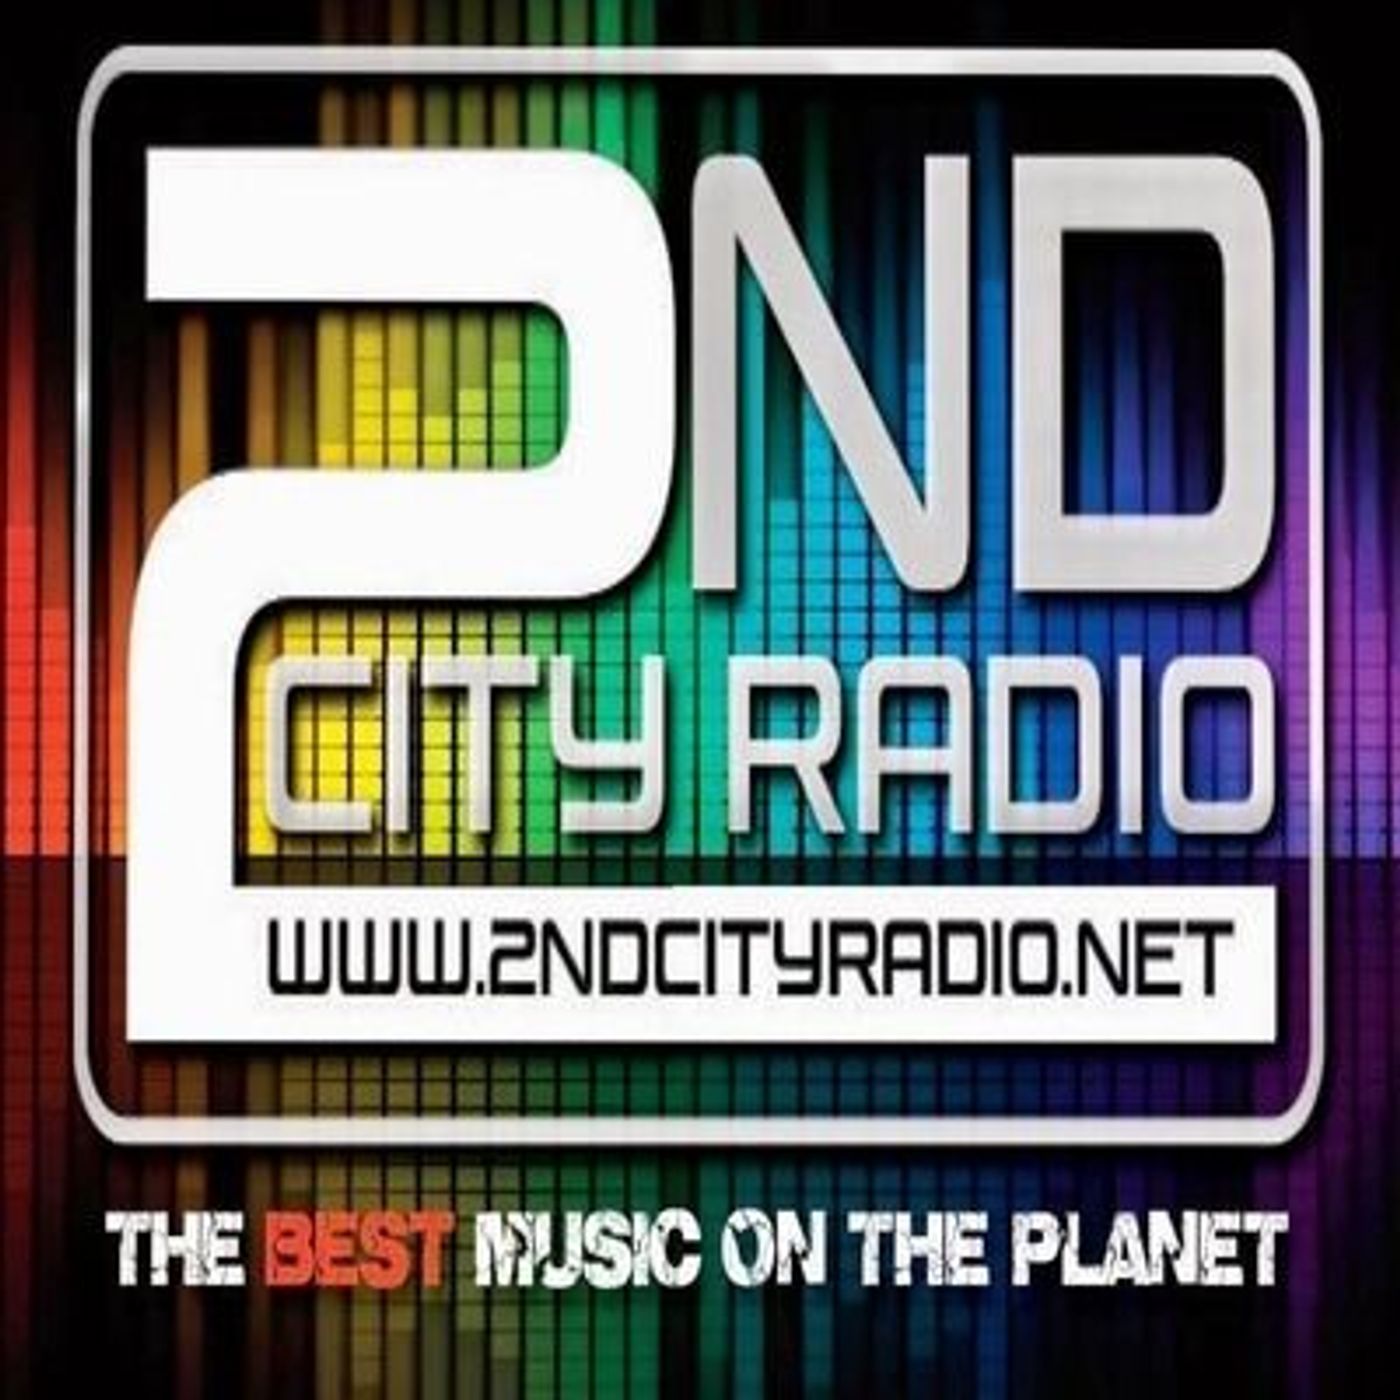 Friday the 6th of May 2022 on 2ndcity Radio with Classic Chat